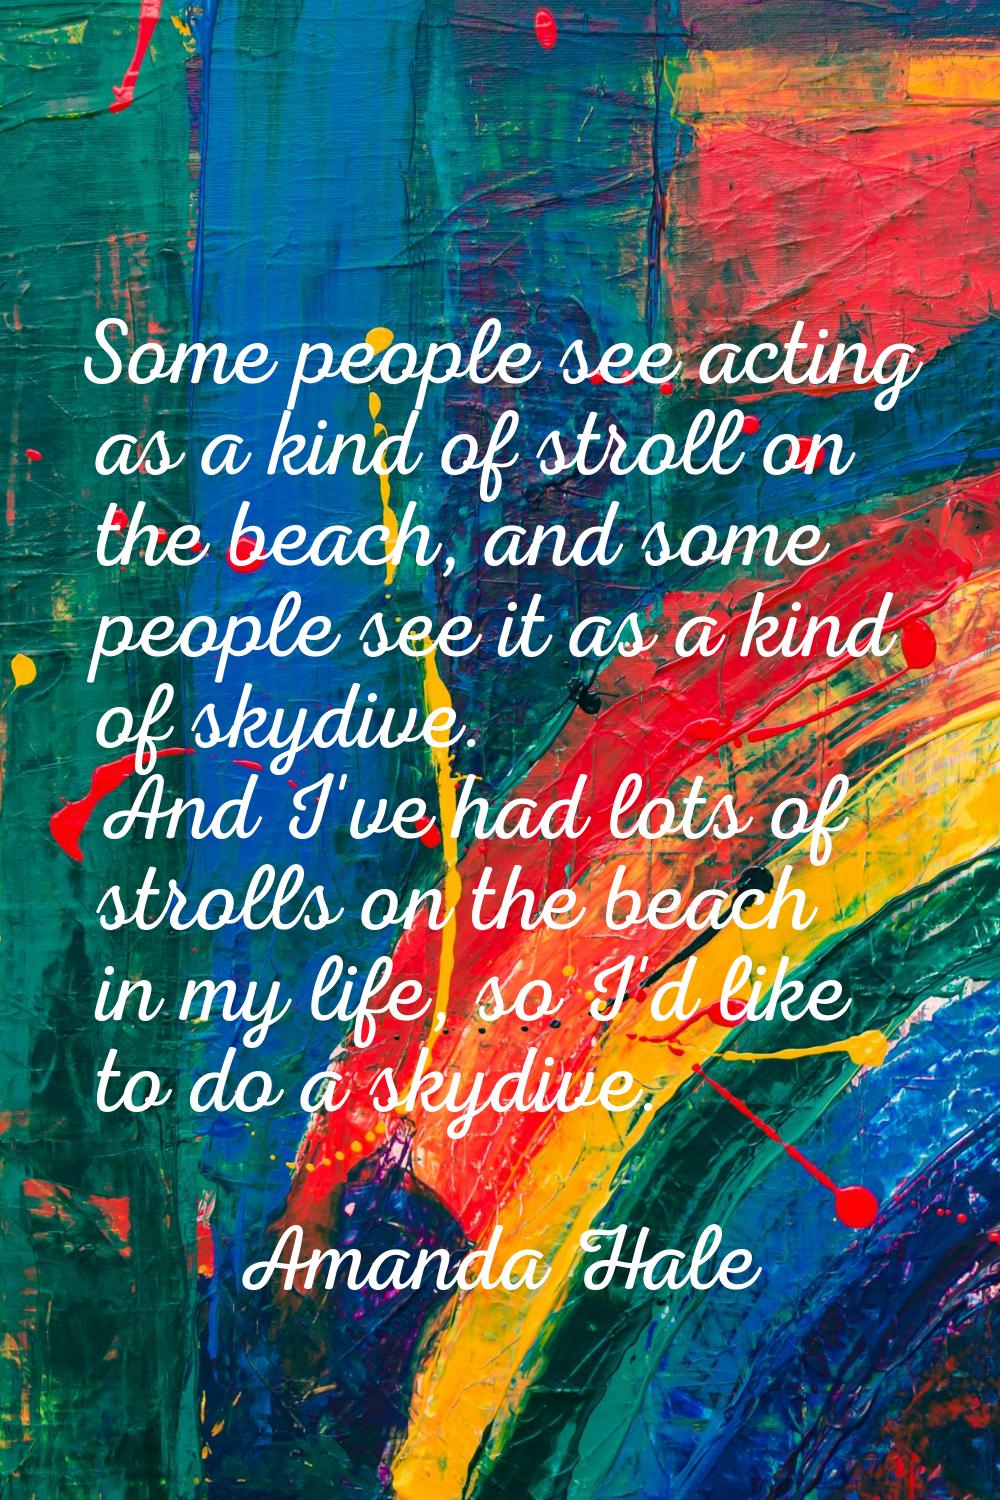 Some people see acting as a kind of stroll on the beach, and some people see it as a kind of skydiv